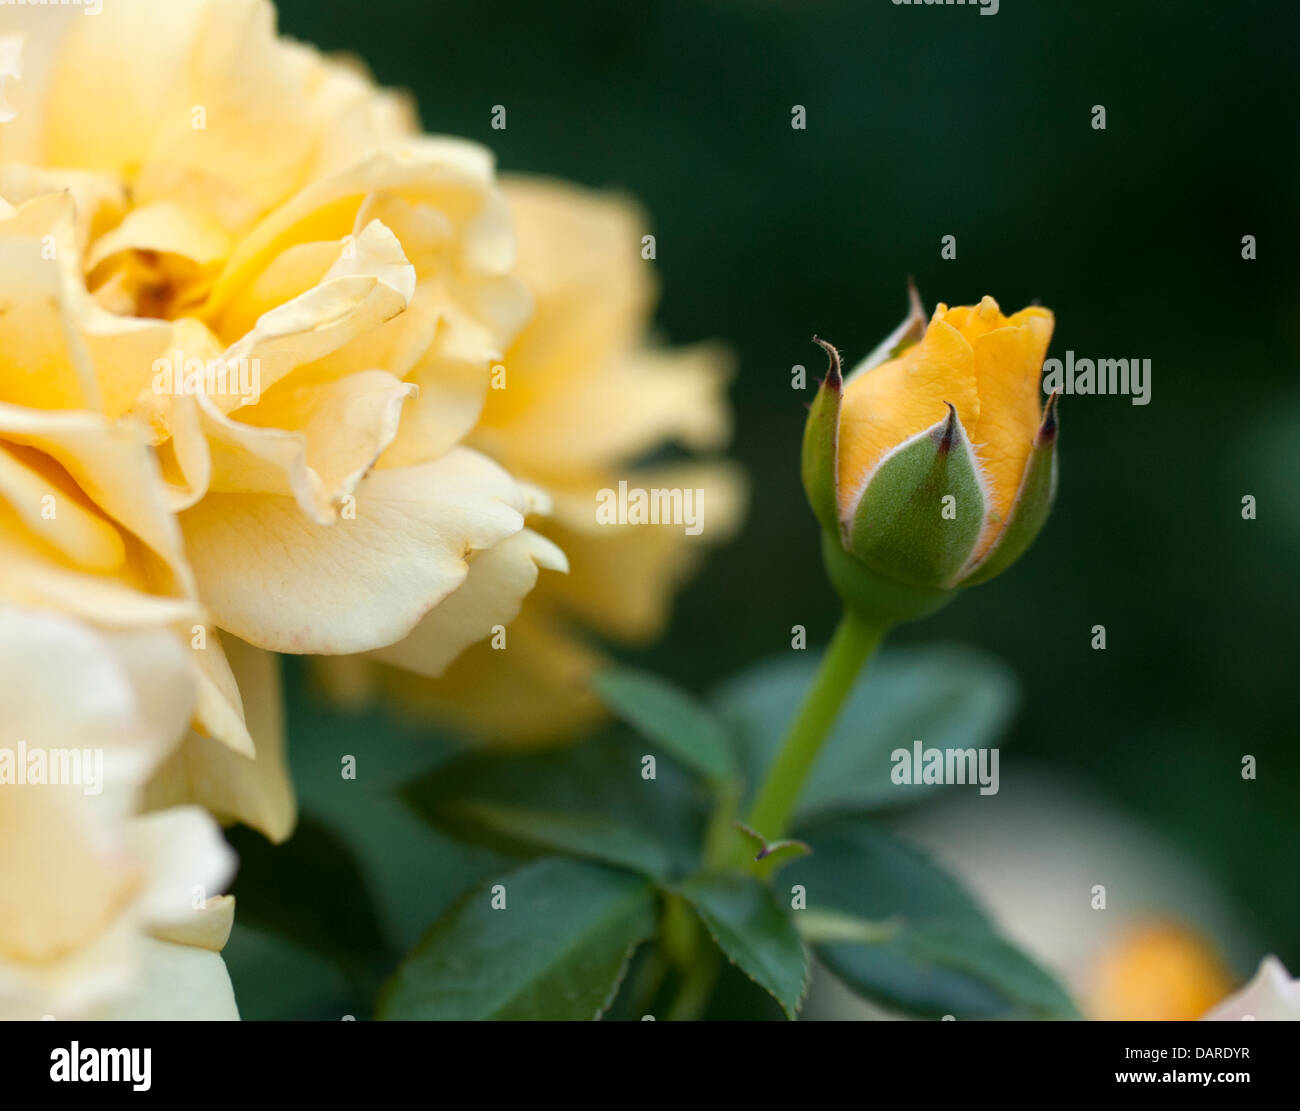 Yellow roses and a rosebud against dark green foliage Stock Photo